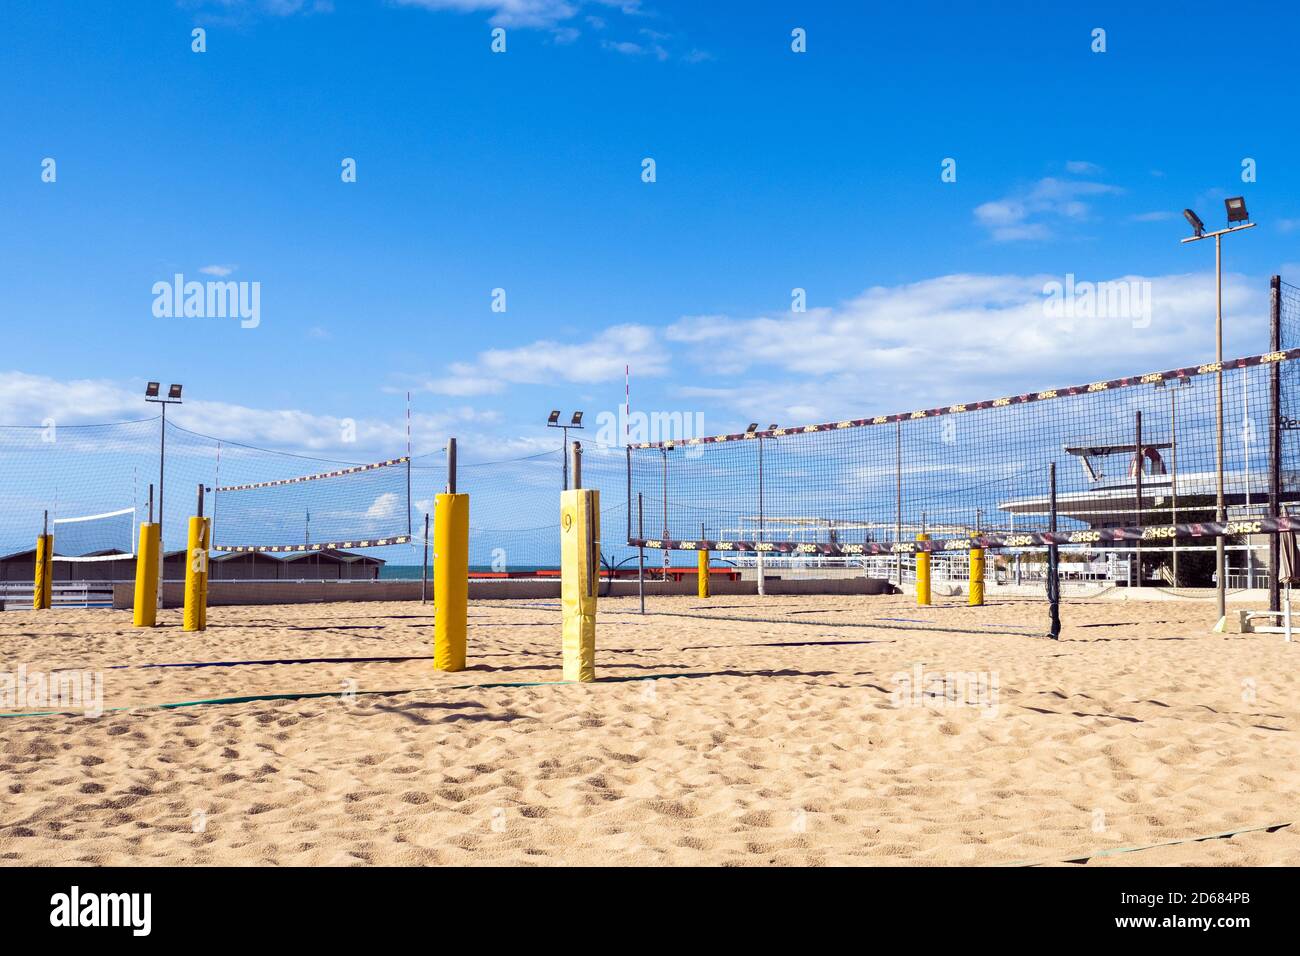 Beach volley field of a bathing resort in Ostia Lido - Rome, Italy Stock Photo